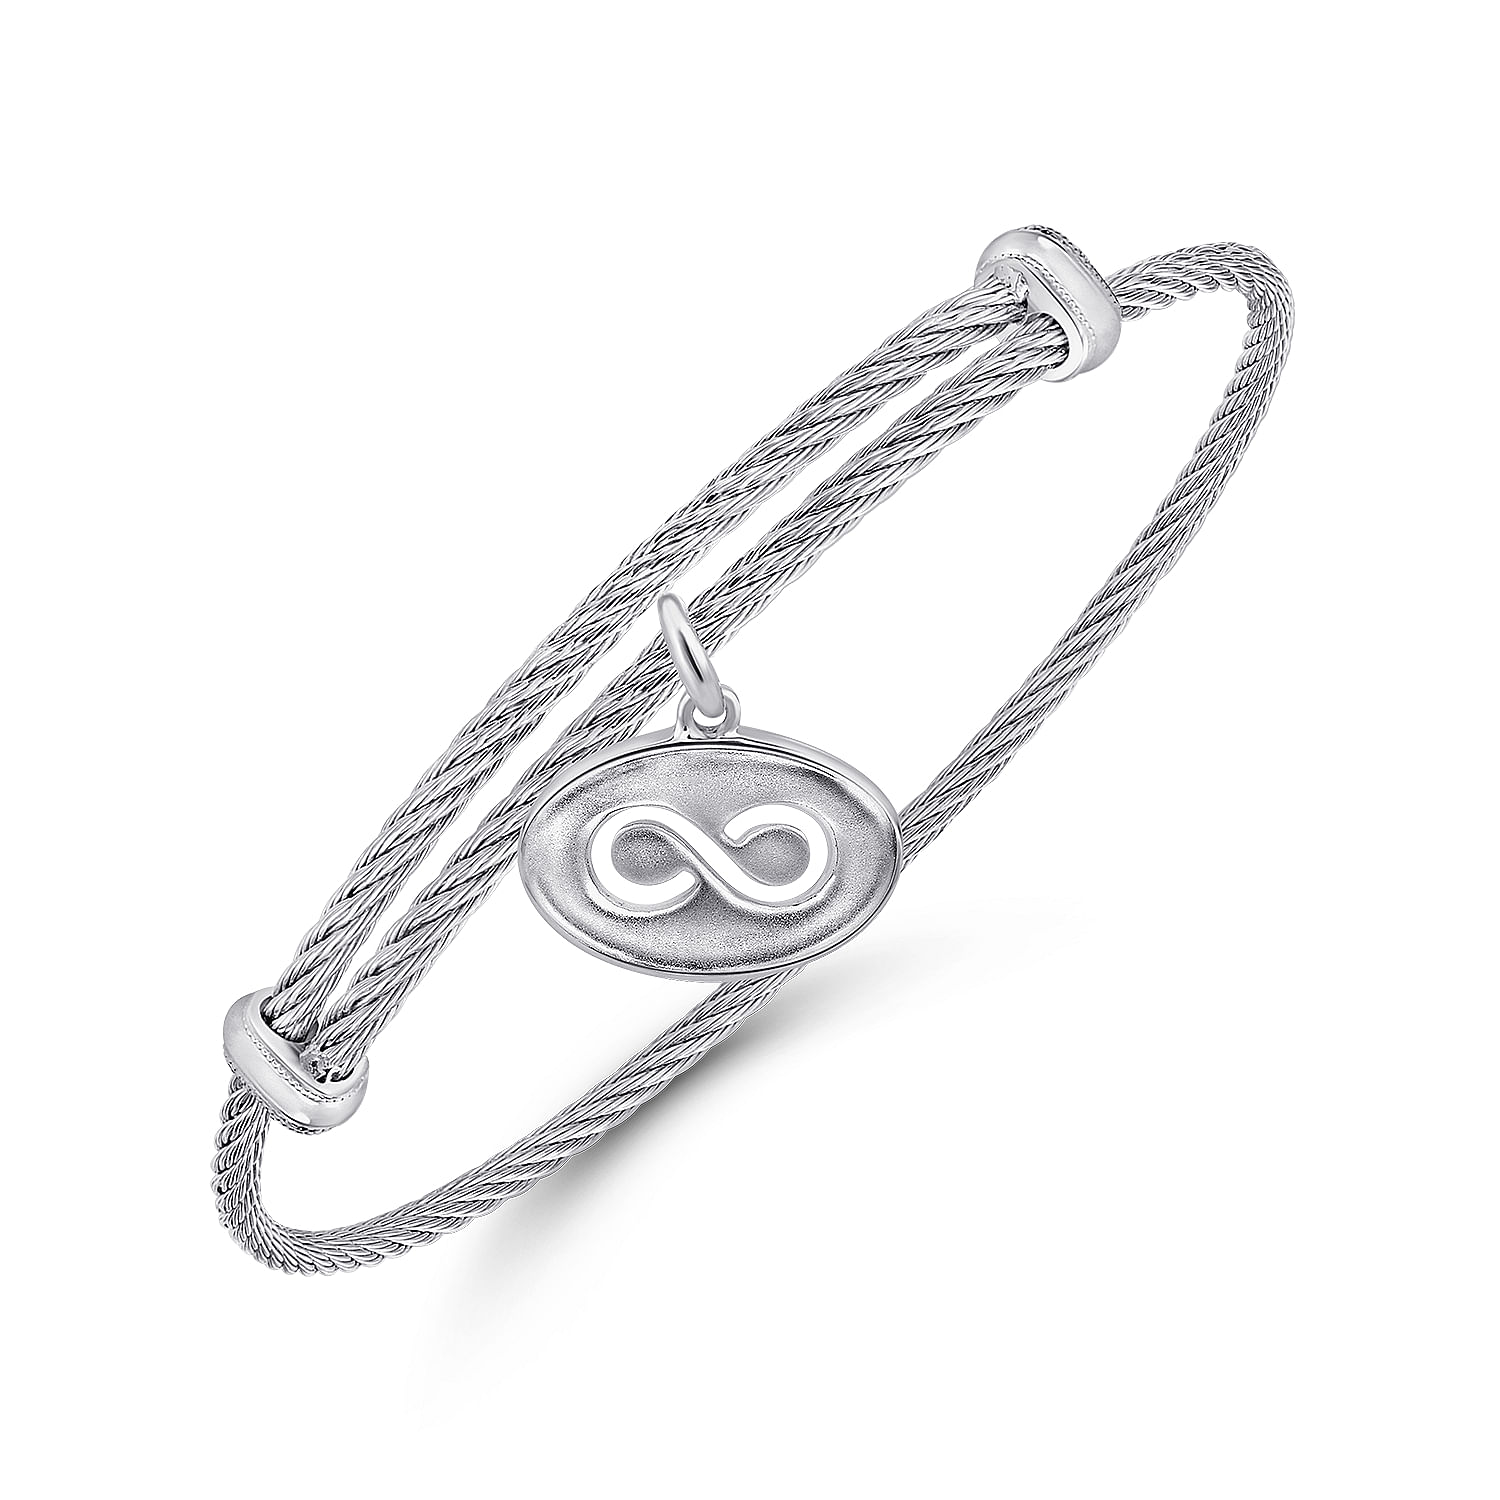 Adjustable Twisted Cable Stainless Steel Bangle with Sterling Silver Infinity Charm